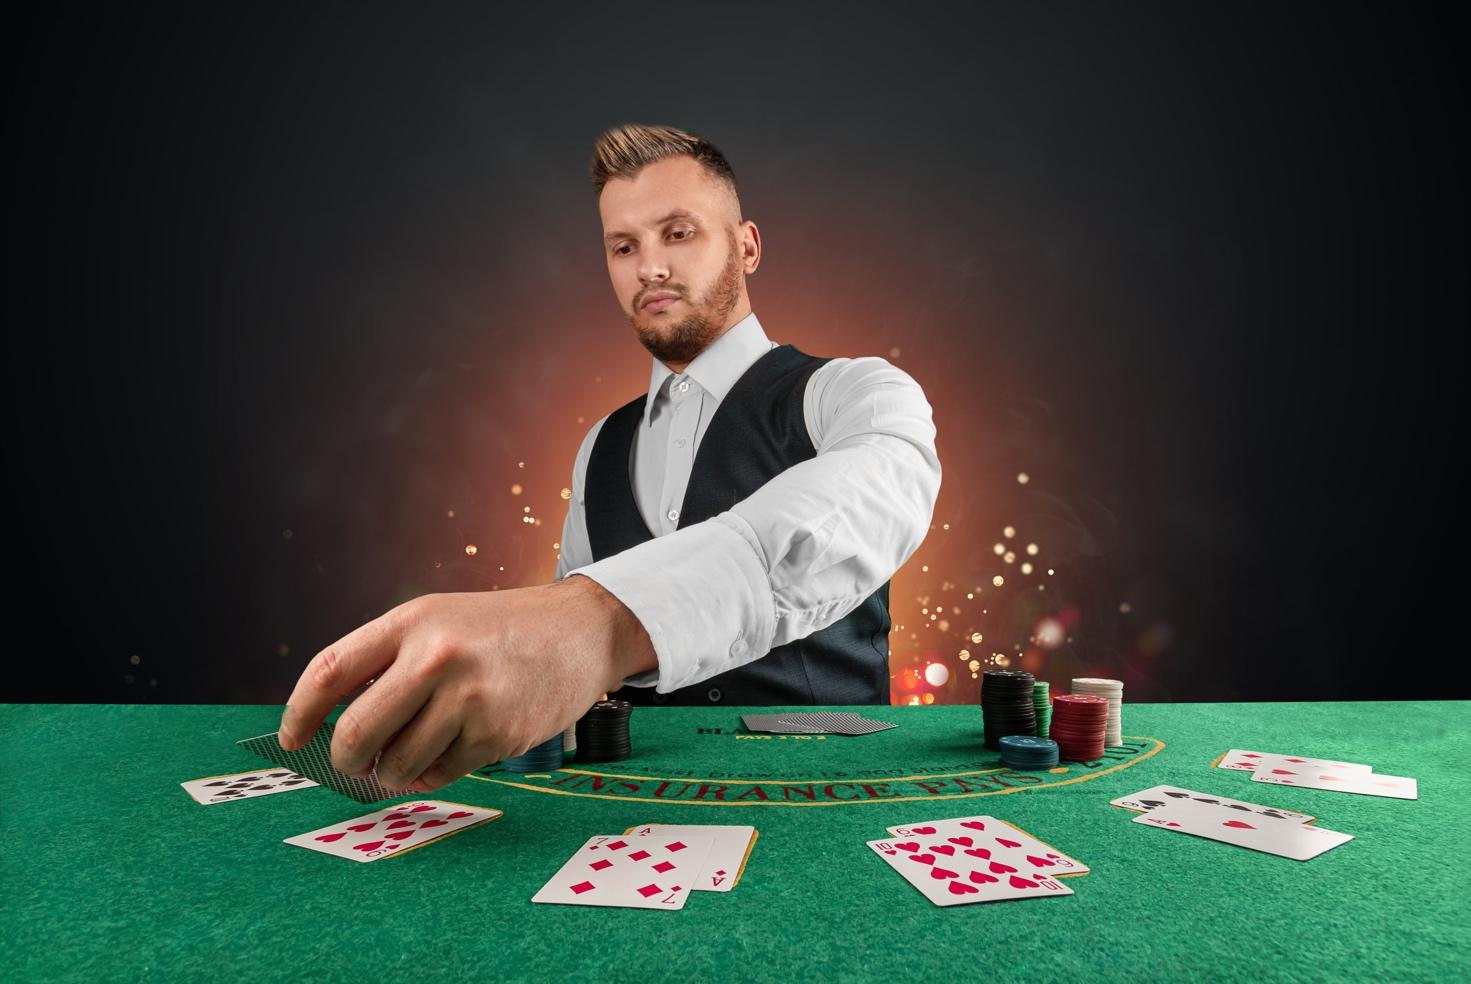 A person sitting at a poker table

Description automatically generated